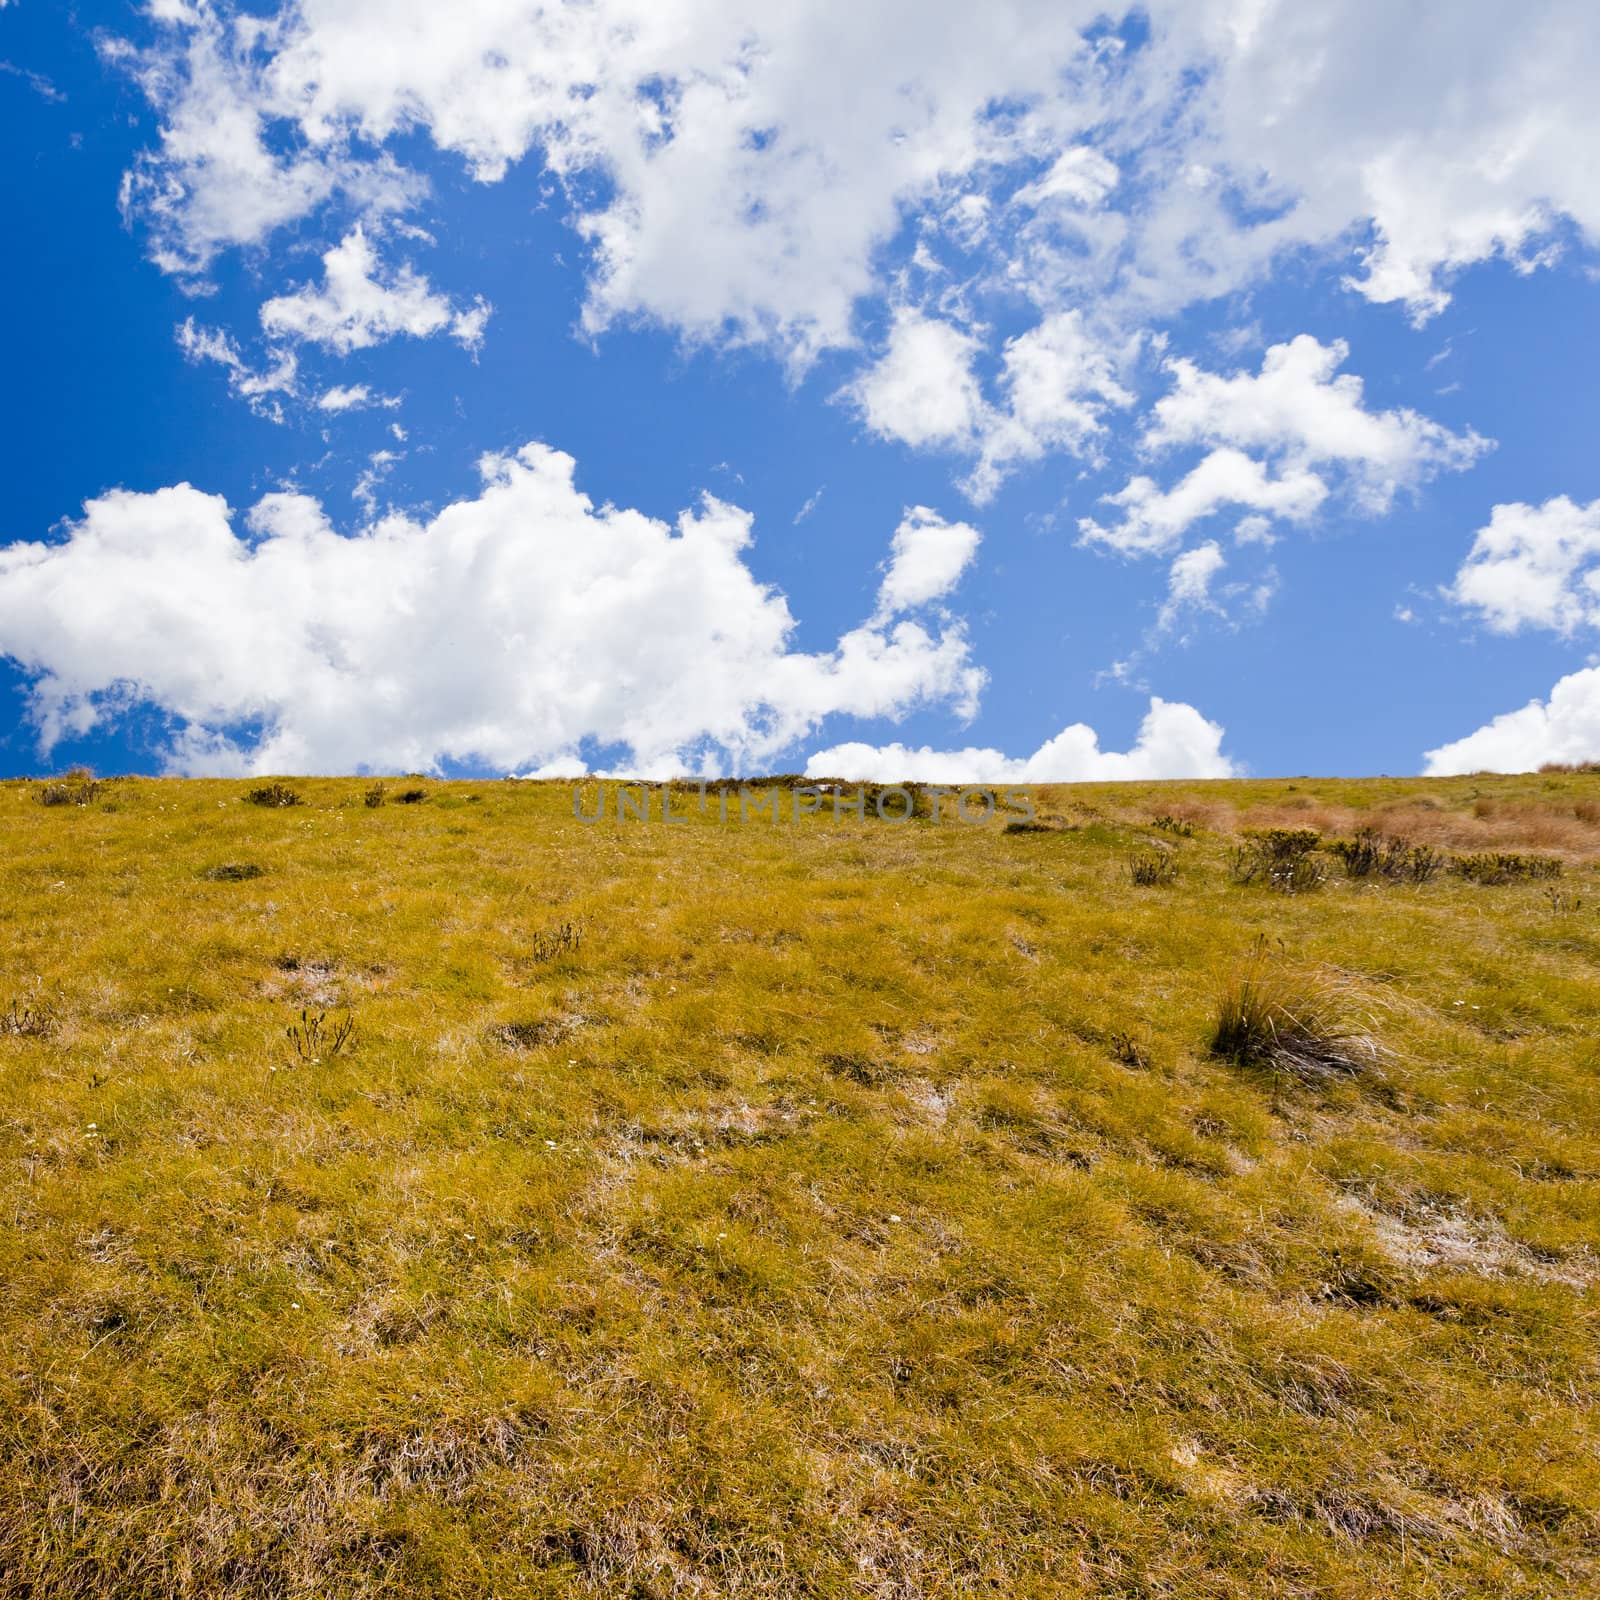 Dry yellow grass on hillside against blue sky by PiLens